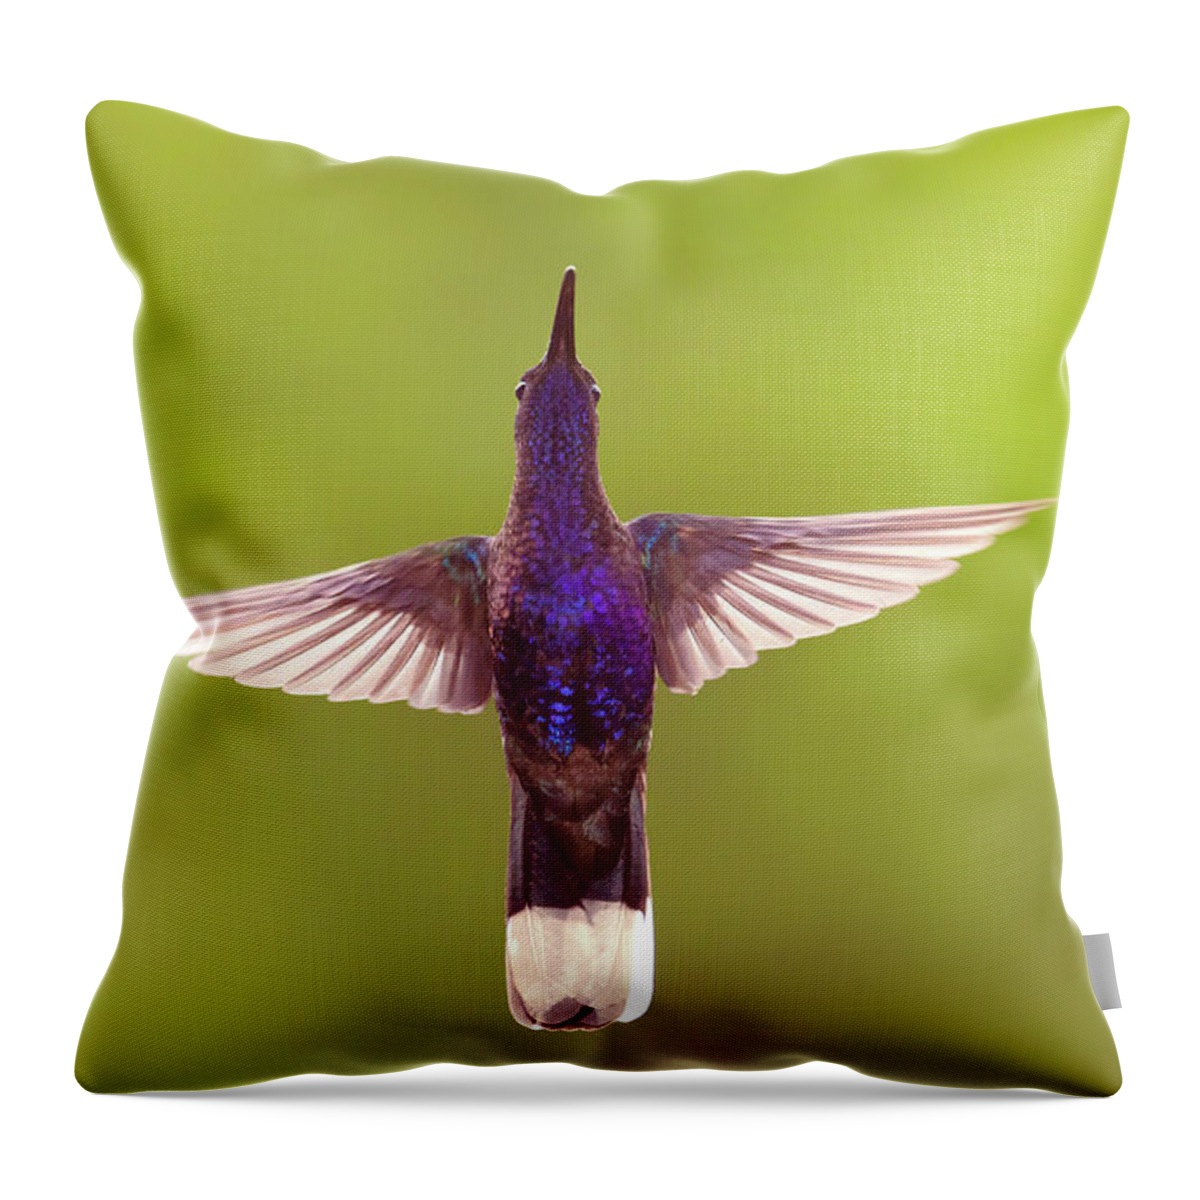 Violet Sabrewing Throw Pillow featuring the photograph Keep Hovering - Violet sabrewing hummingbird by Roeselien Raimond